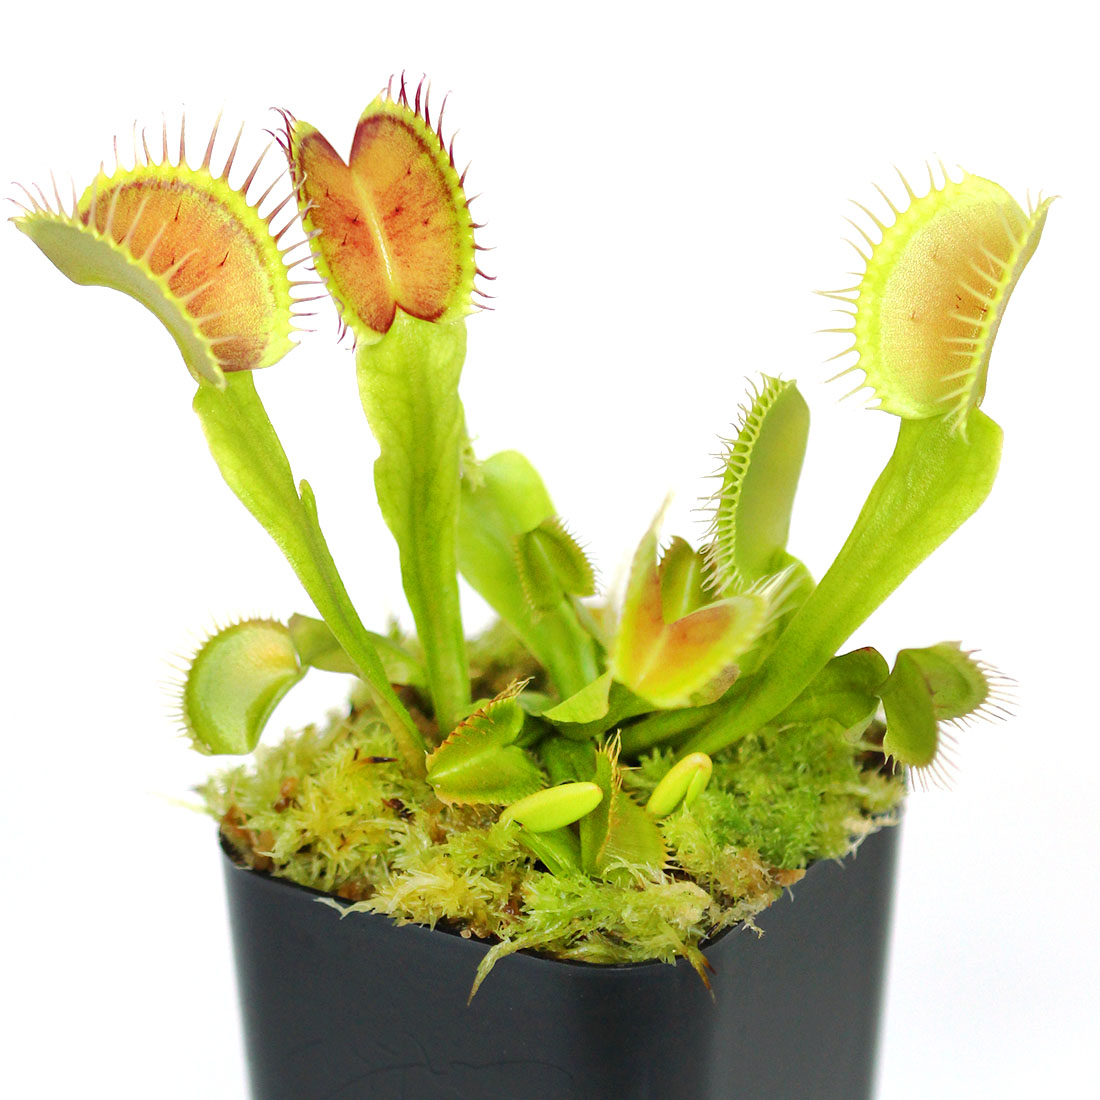 Venus Fly Trap Care: How to Water, Feed, & Tend This Carnivorous Plant